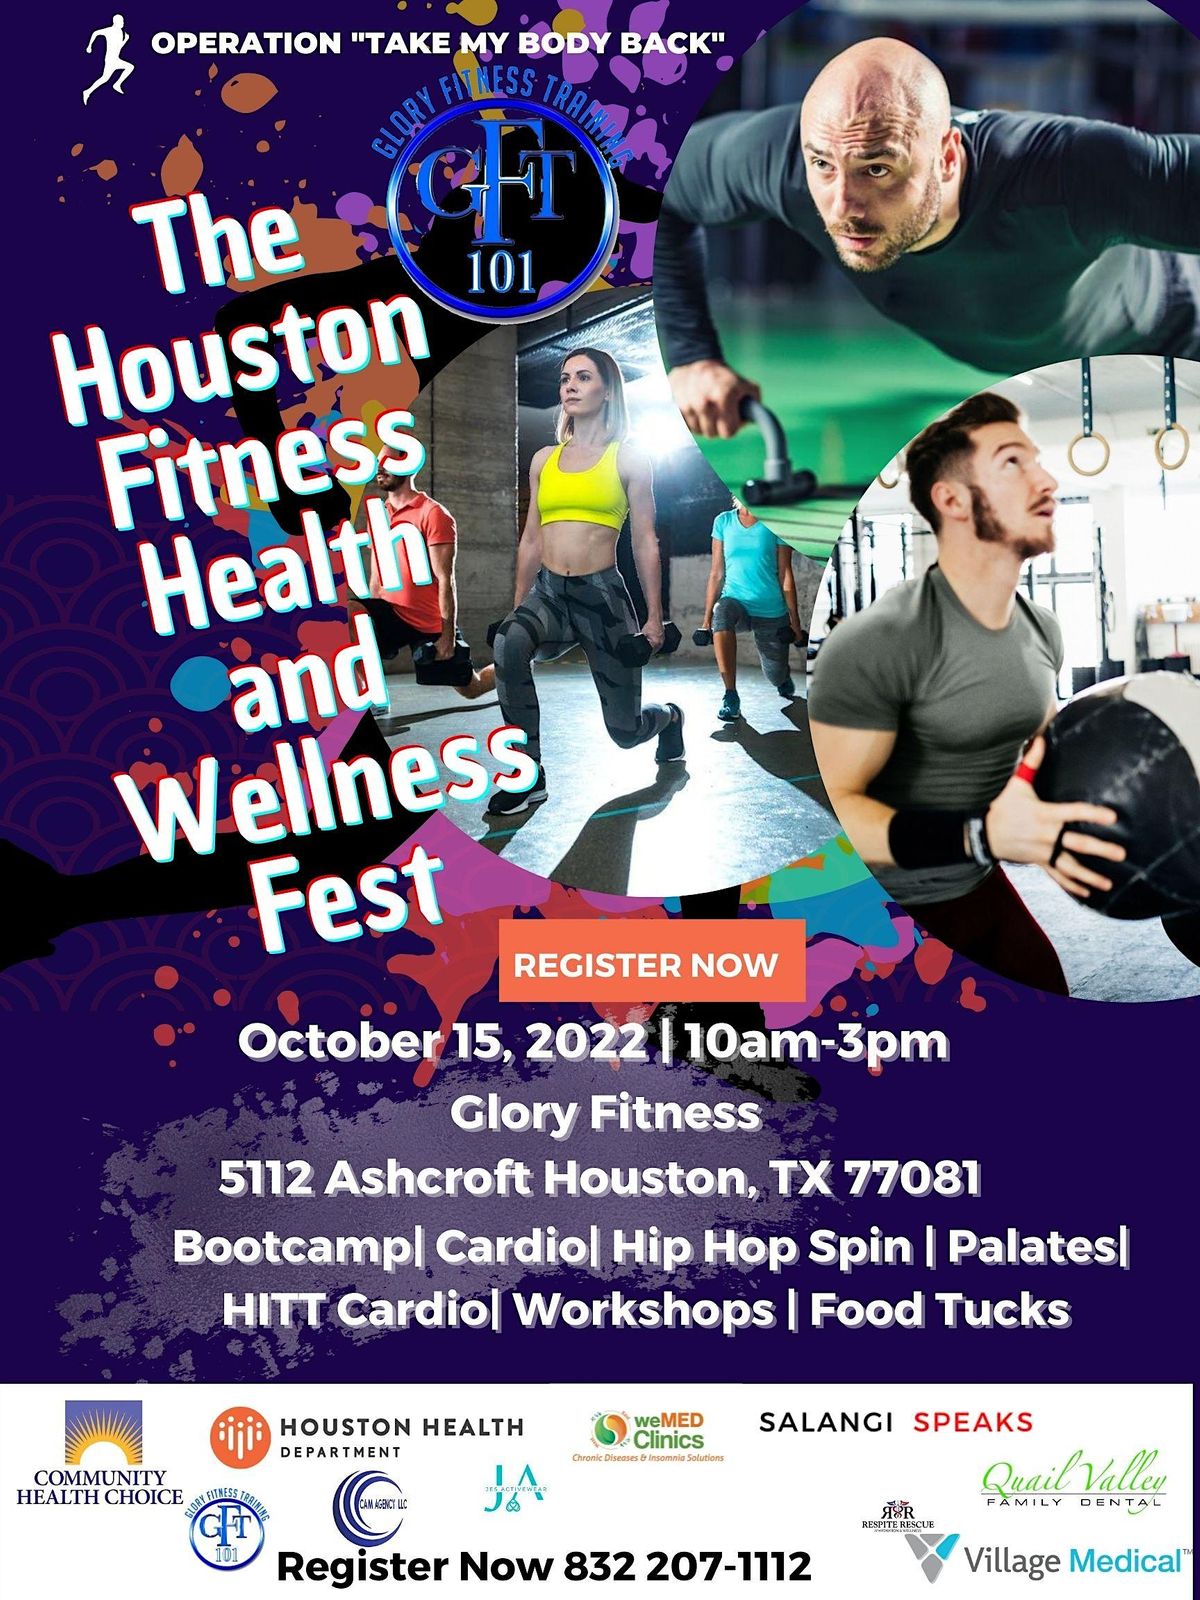 The Houston Fitness Health and Wellness Fest